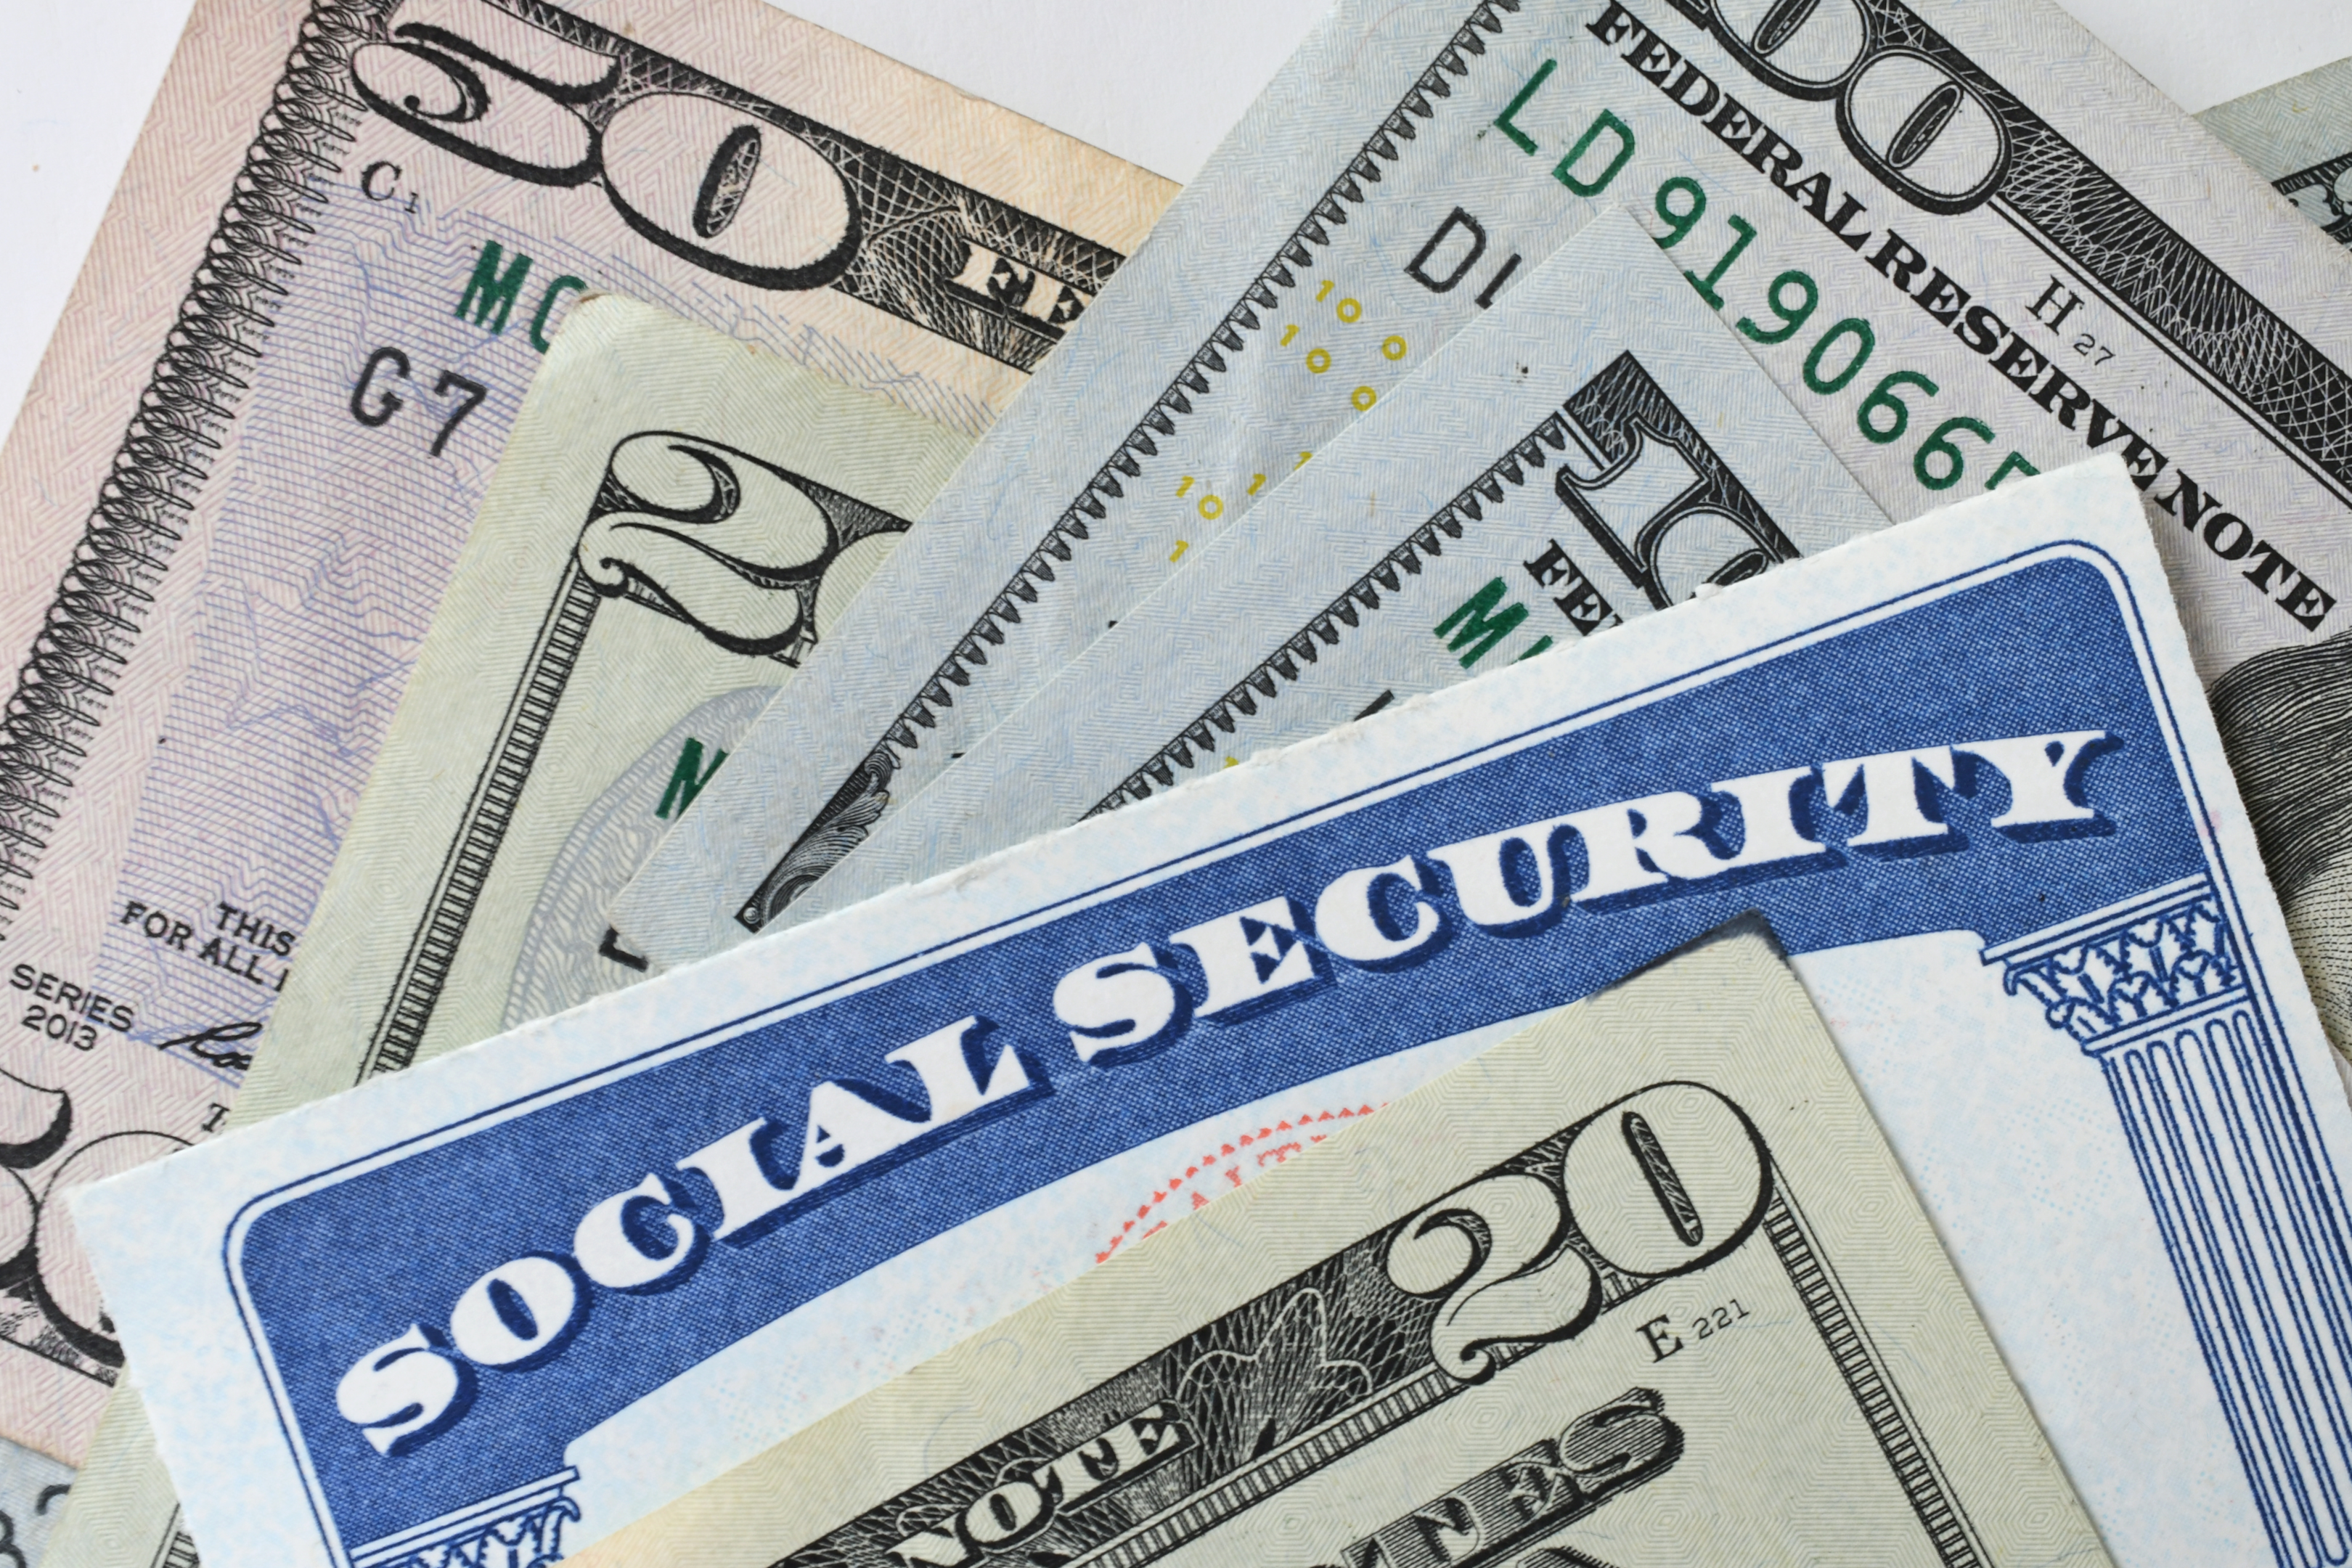 "Unlock the benefits you deserve: Understanding the potential of Social Security Disability Benefits Programs through your unique social security number."